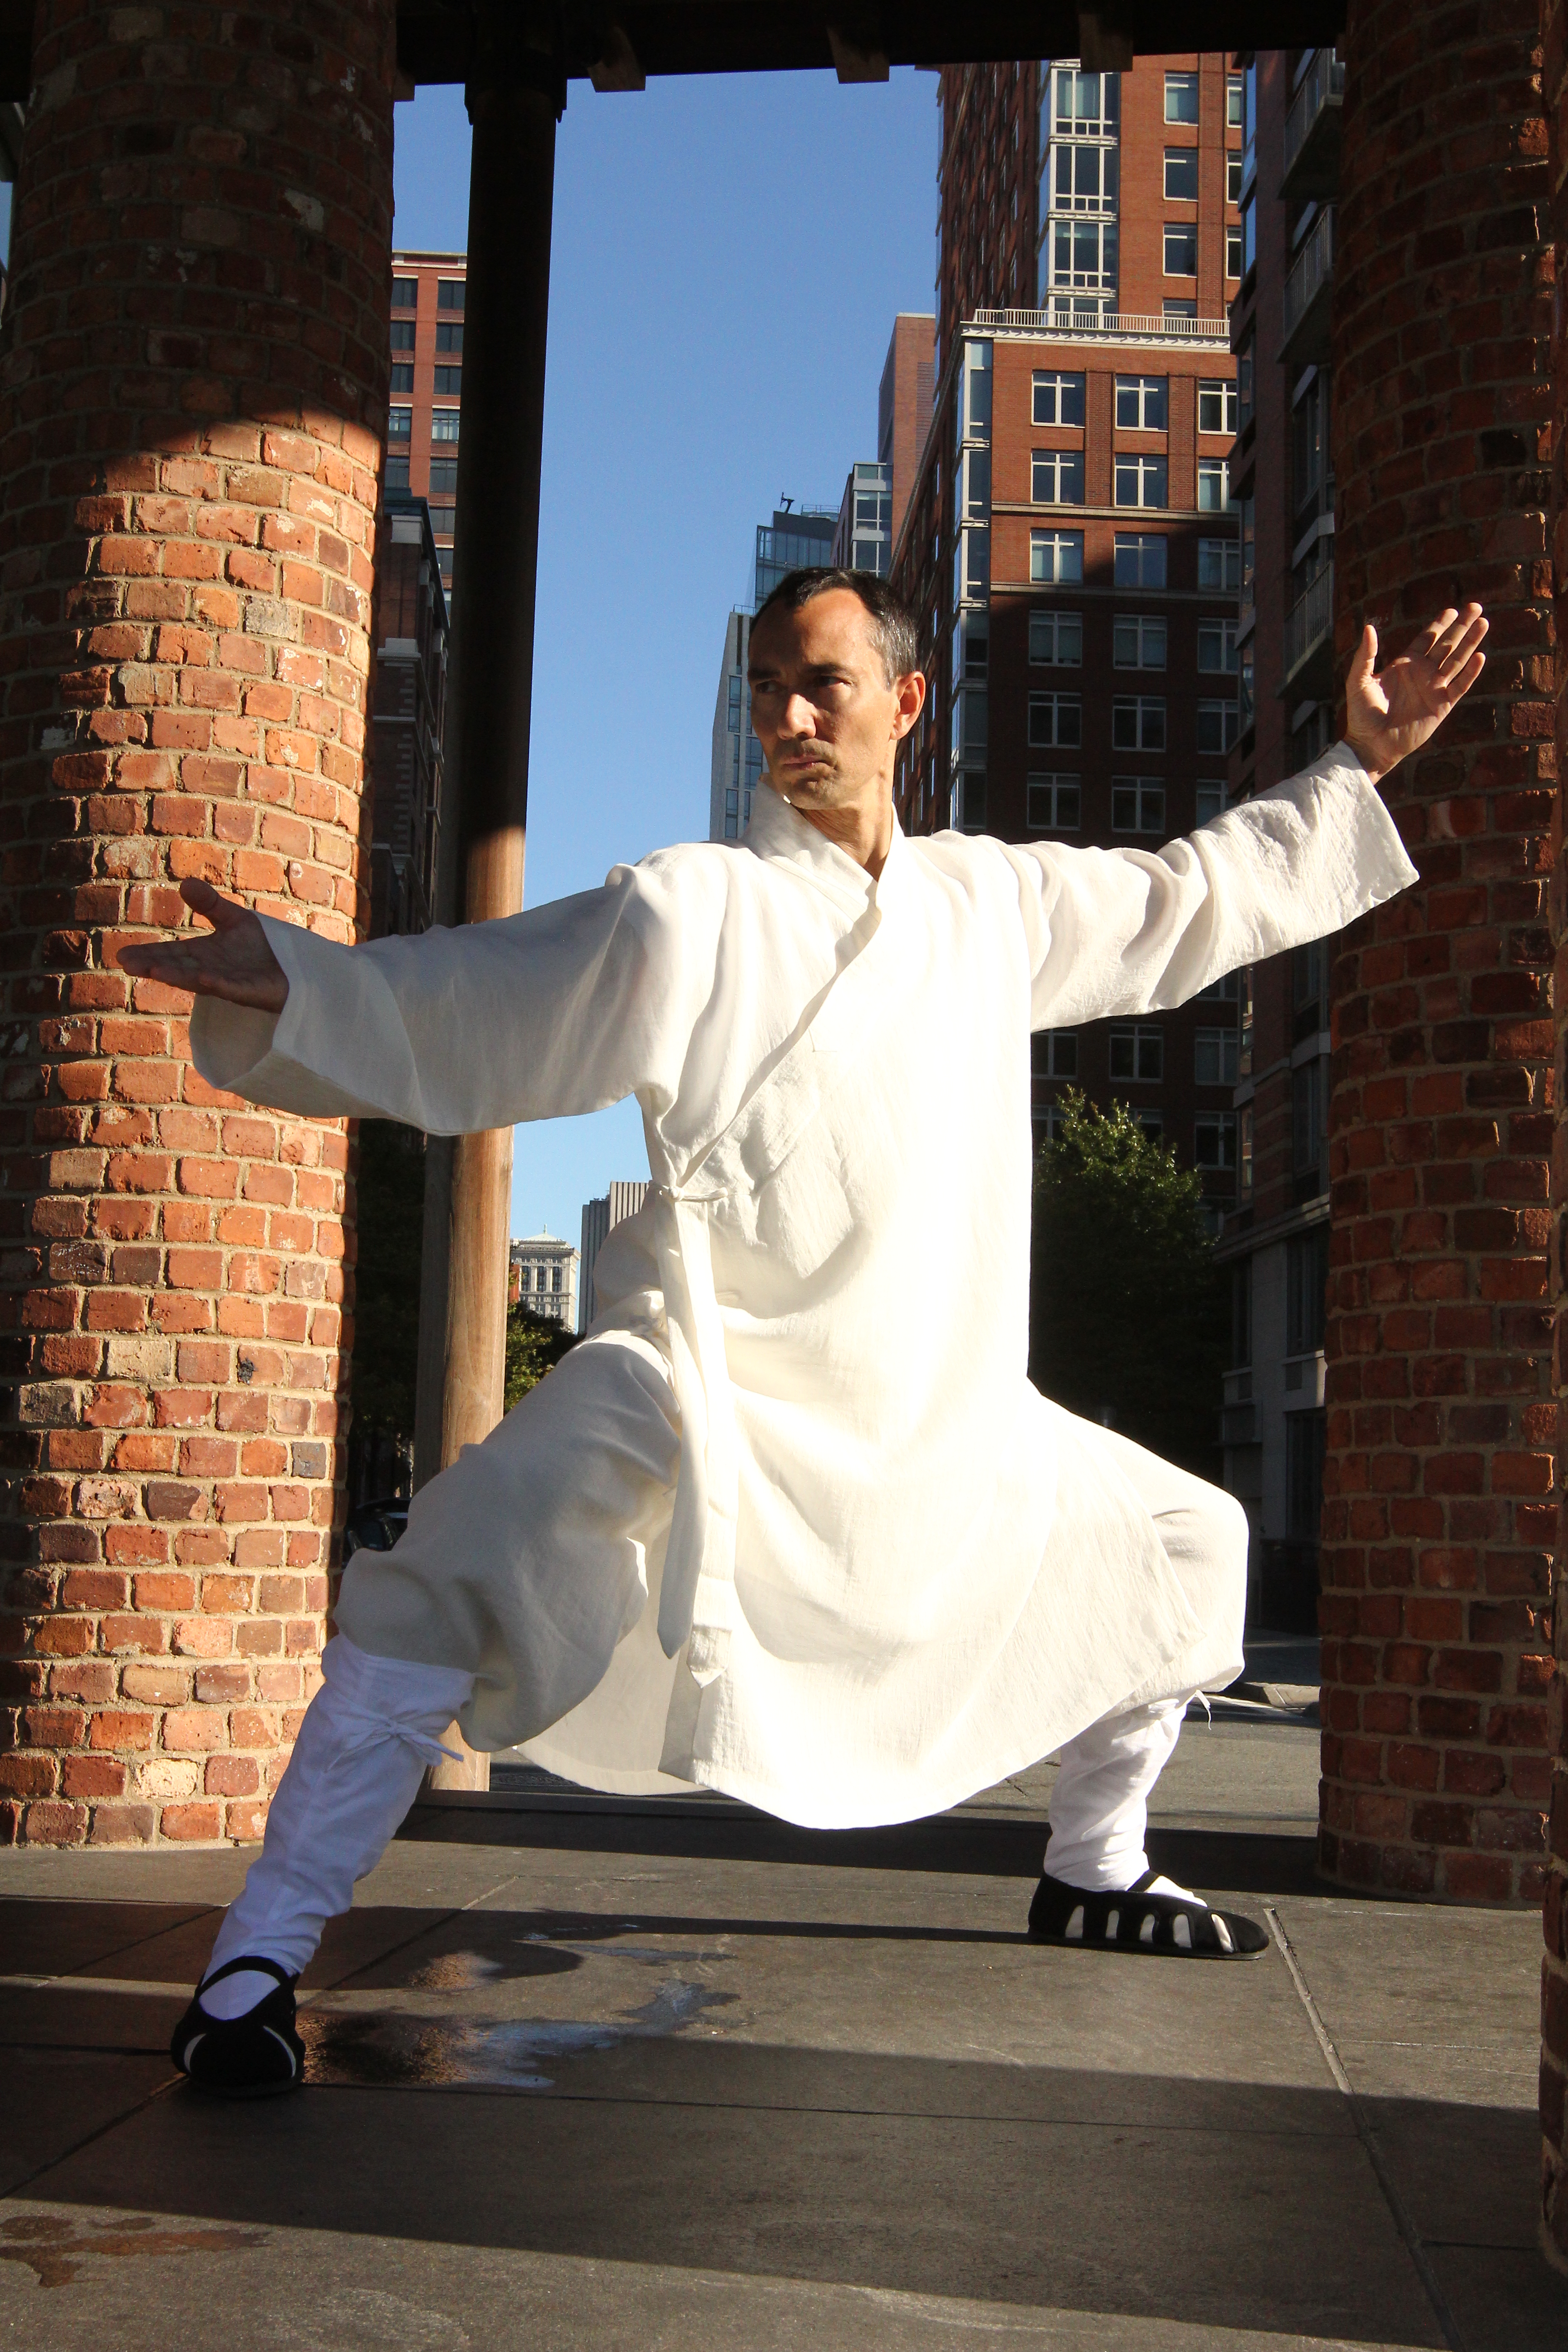 Sifu Lyn in full Wudang regalia with the backdrop of TriBeCa, NYC